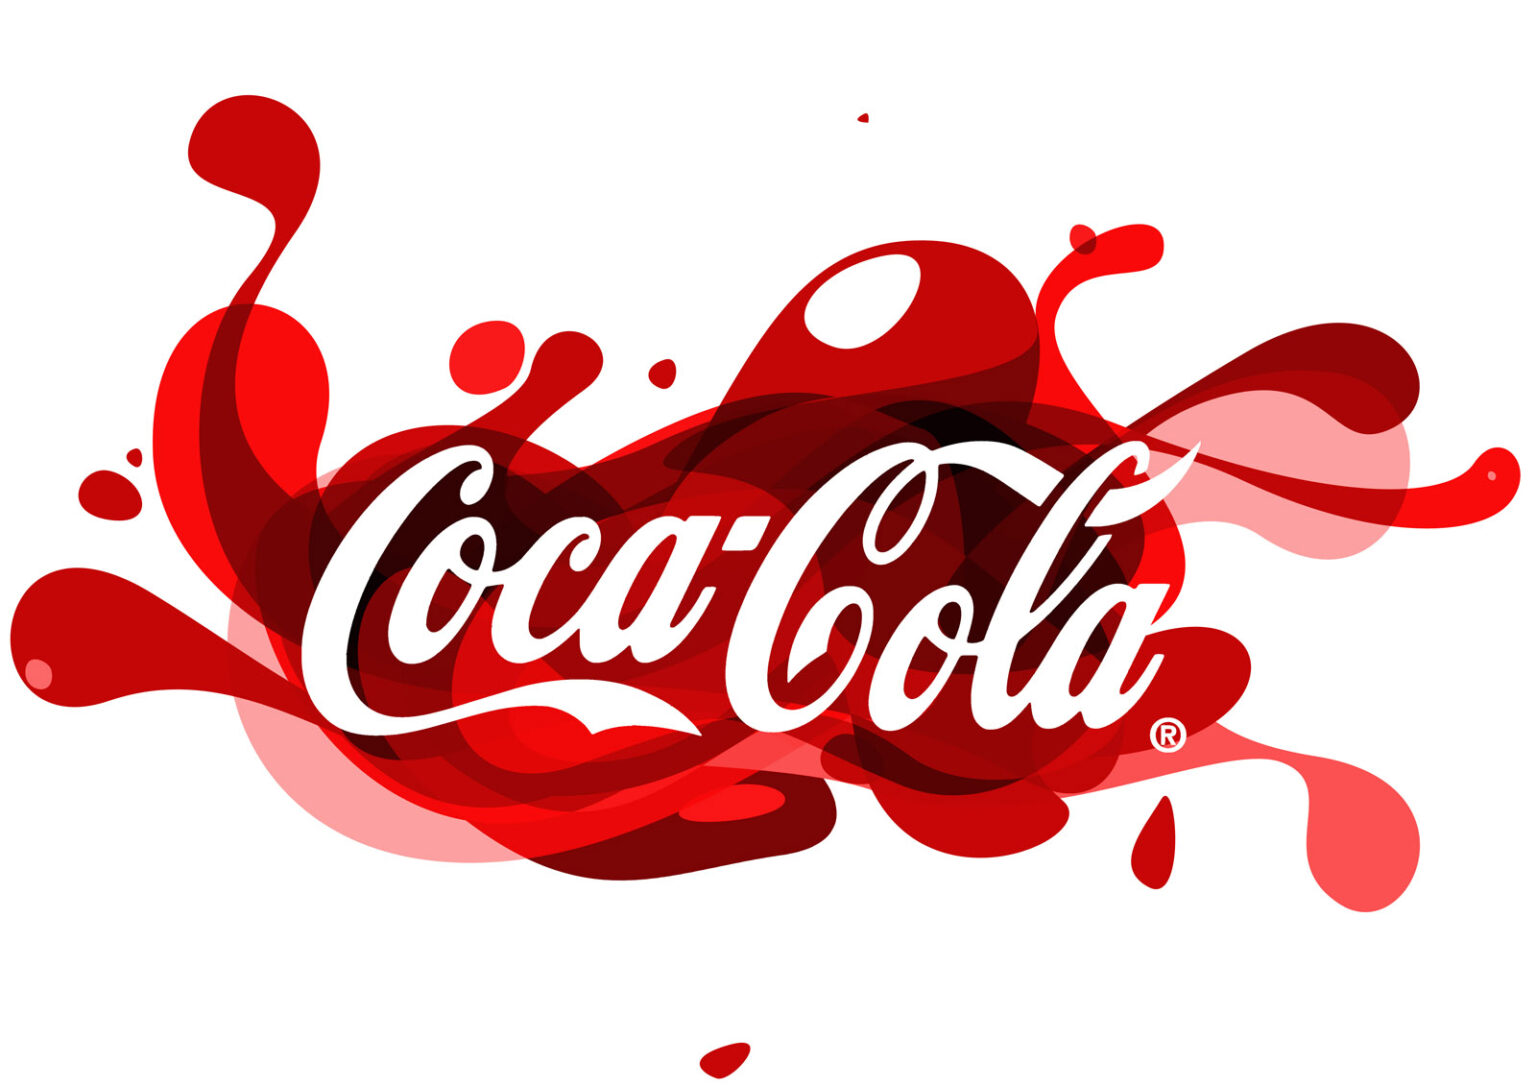 Coca Cola Powerpoint Template Sample Professional Templates